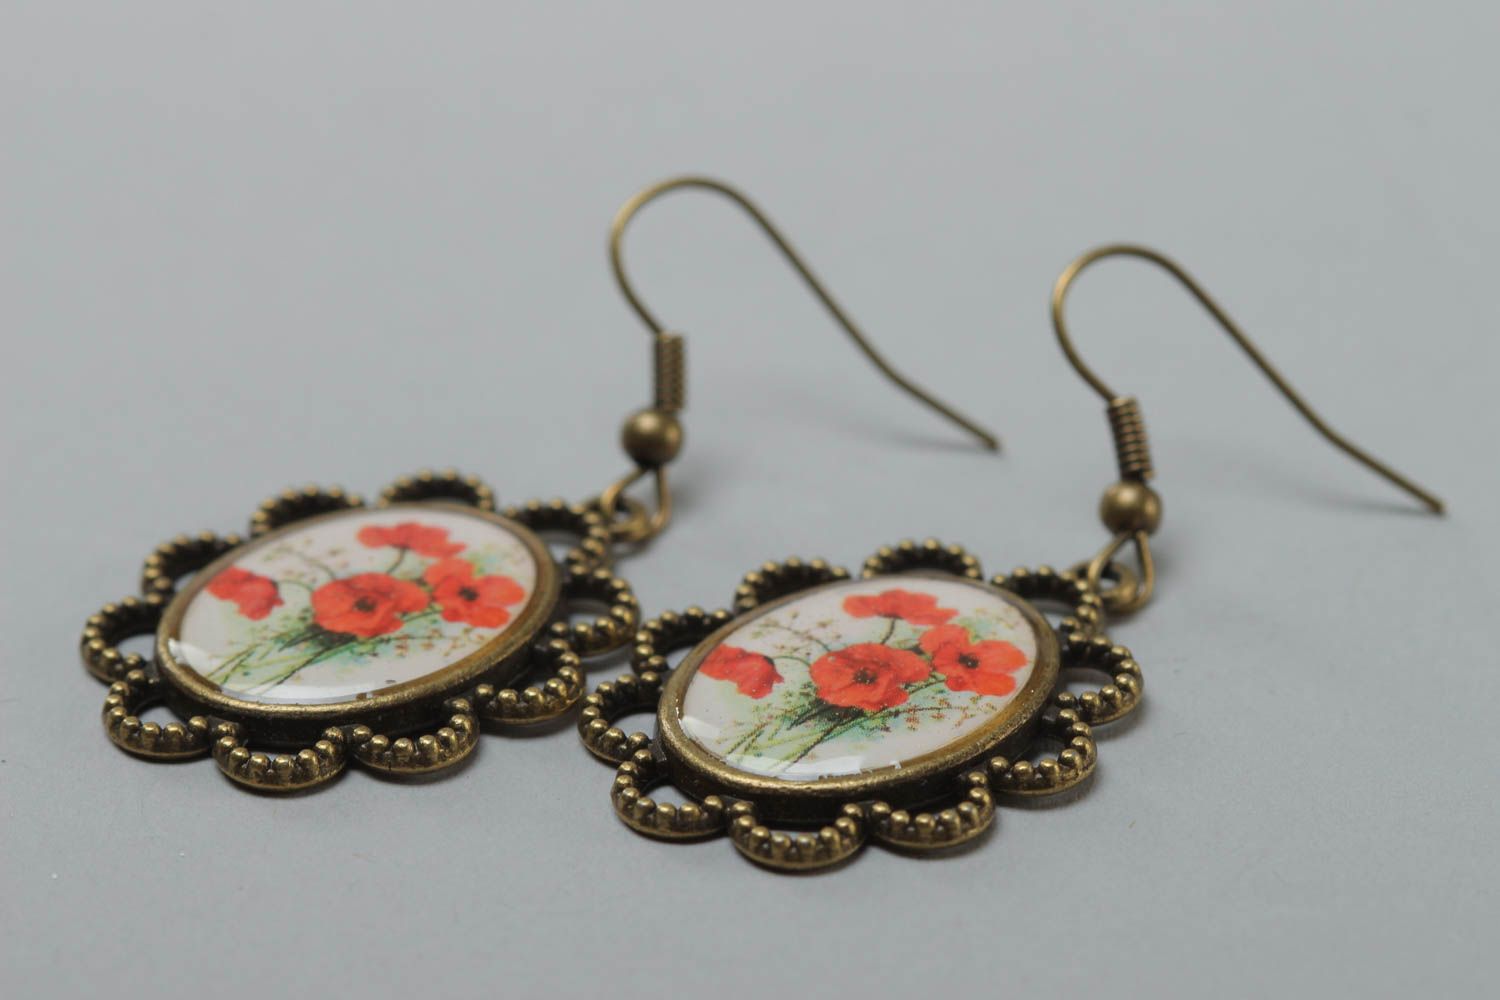 Handmade oval dangling earrings with lacy metal basis and poppy flowers image photo 3